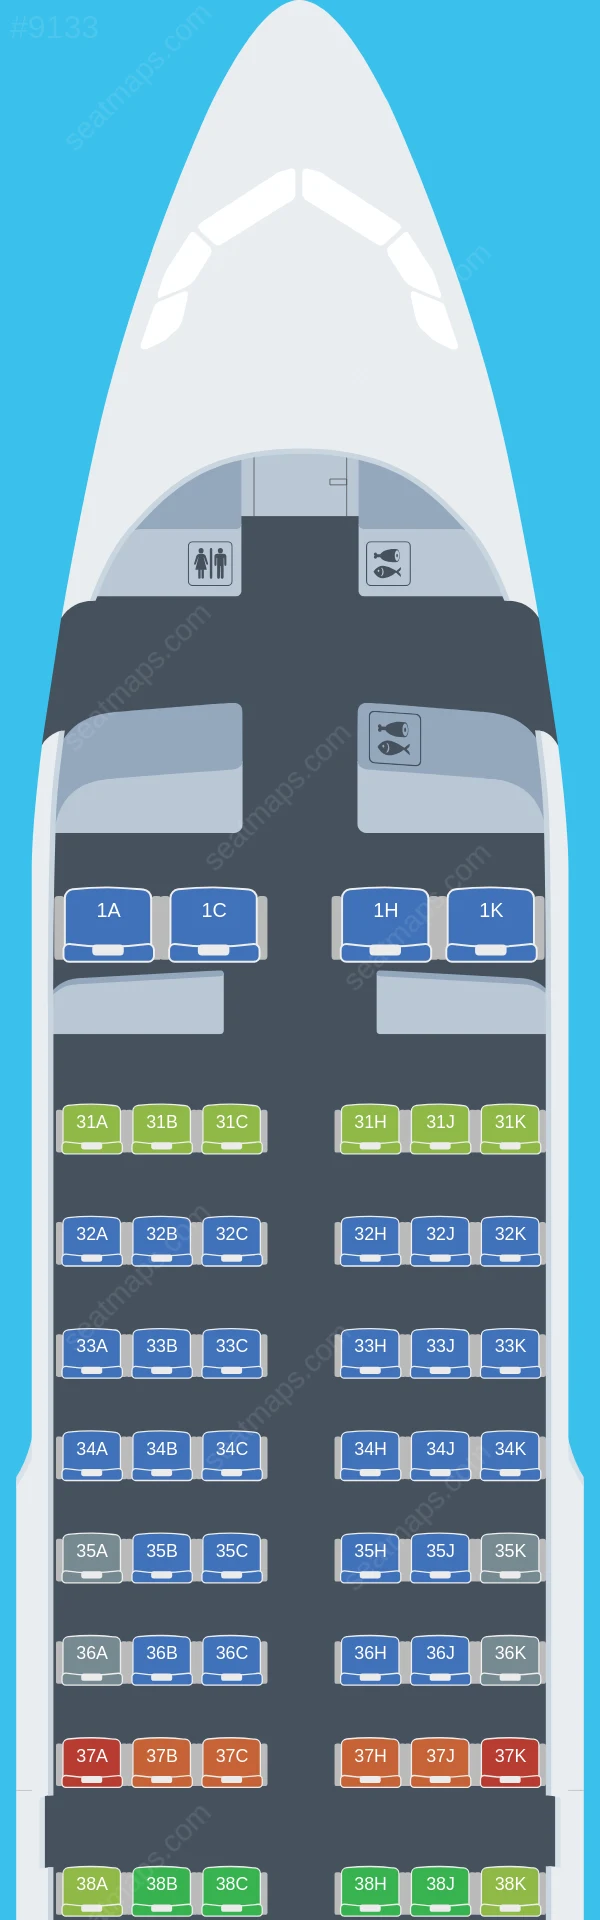 China Southern Airbus A319-100 seatmap preview